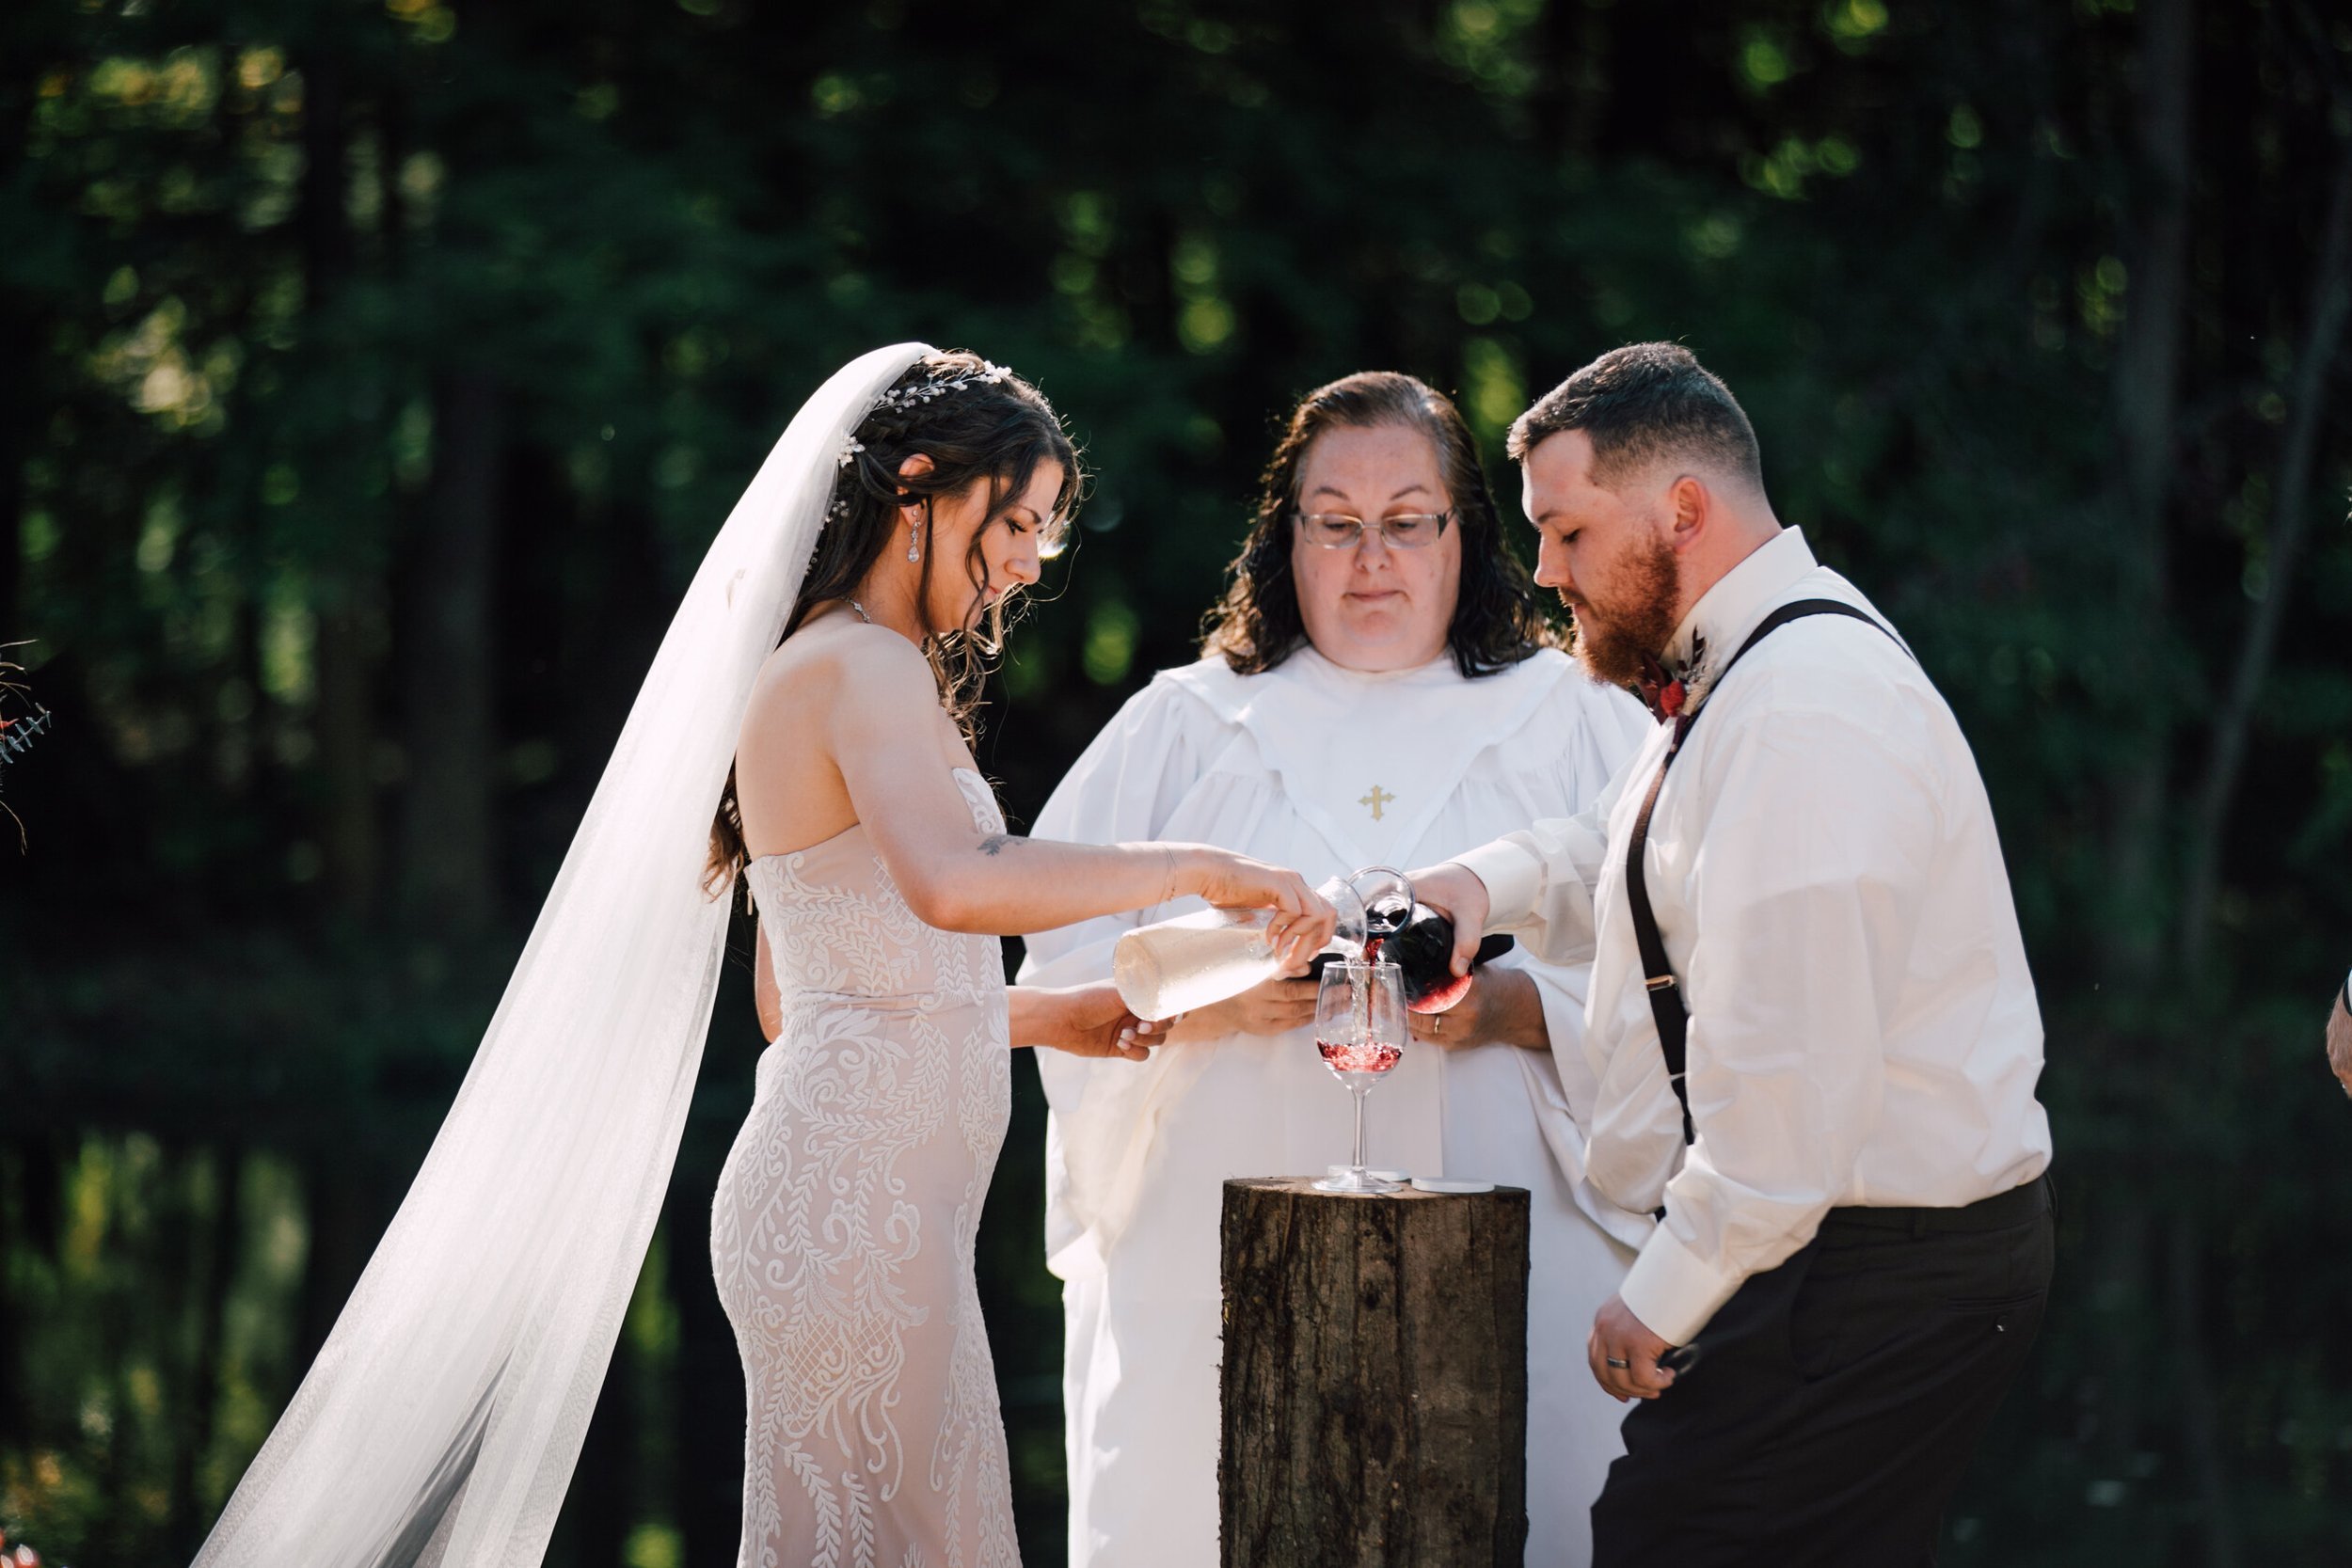  The bride and groom pour white and red wine into a glass during their wine unity ceremony 